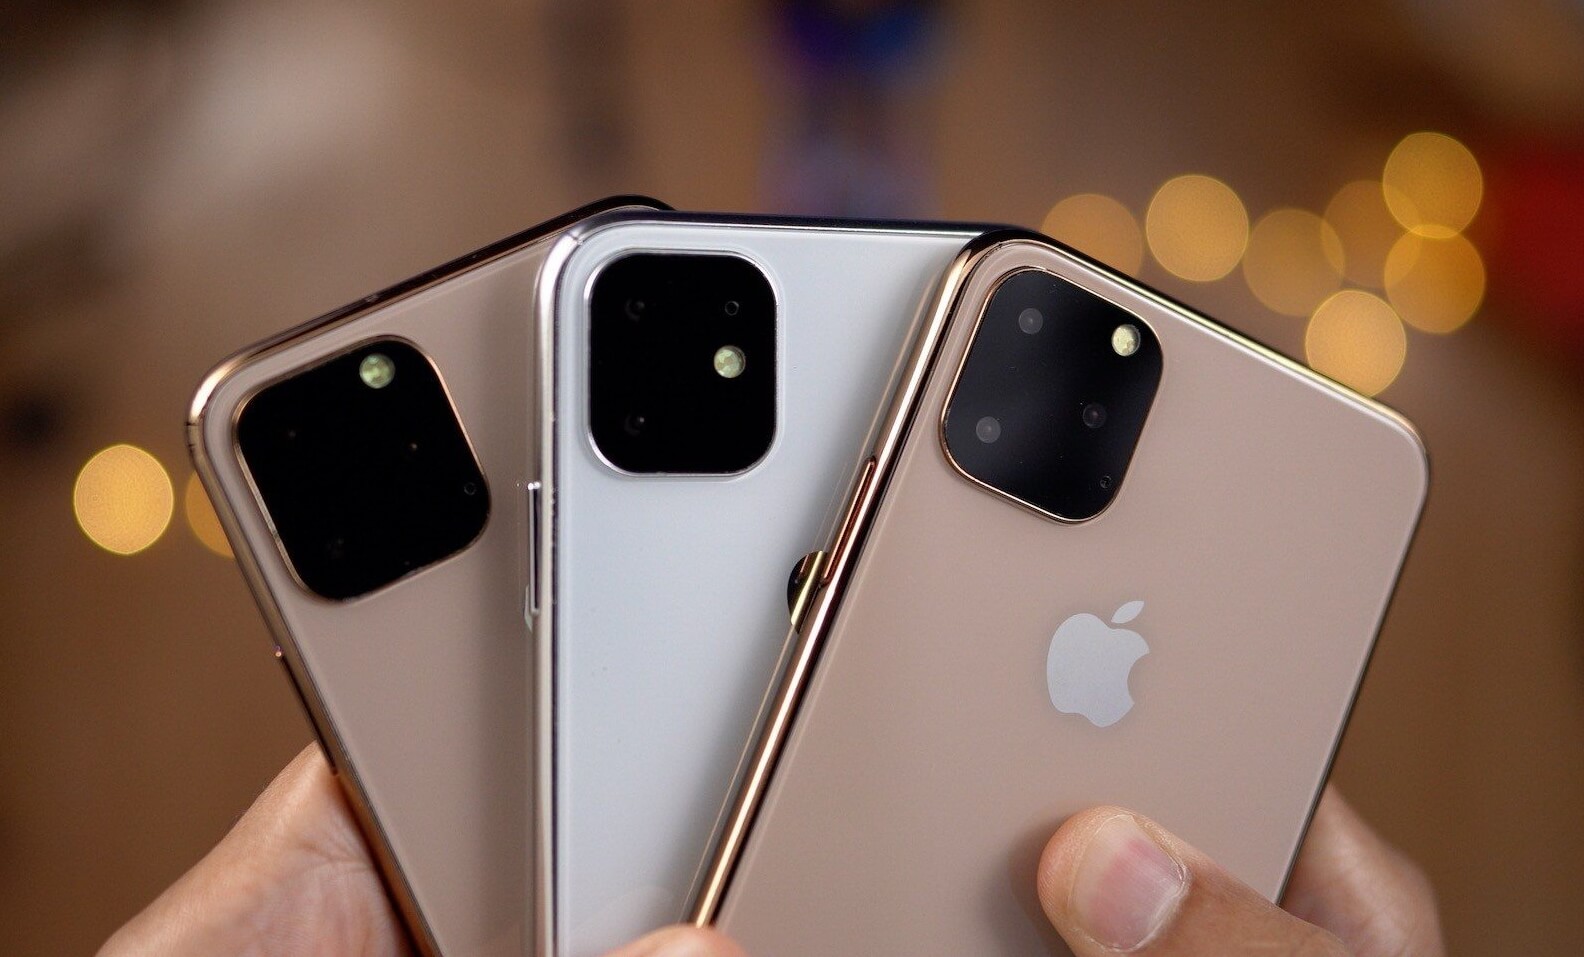 Apple's new iPhone 11 will be powered by A13 chip, retain Lightning port, report claims